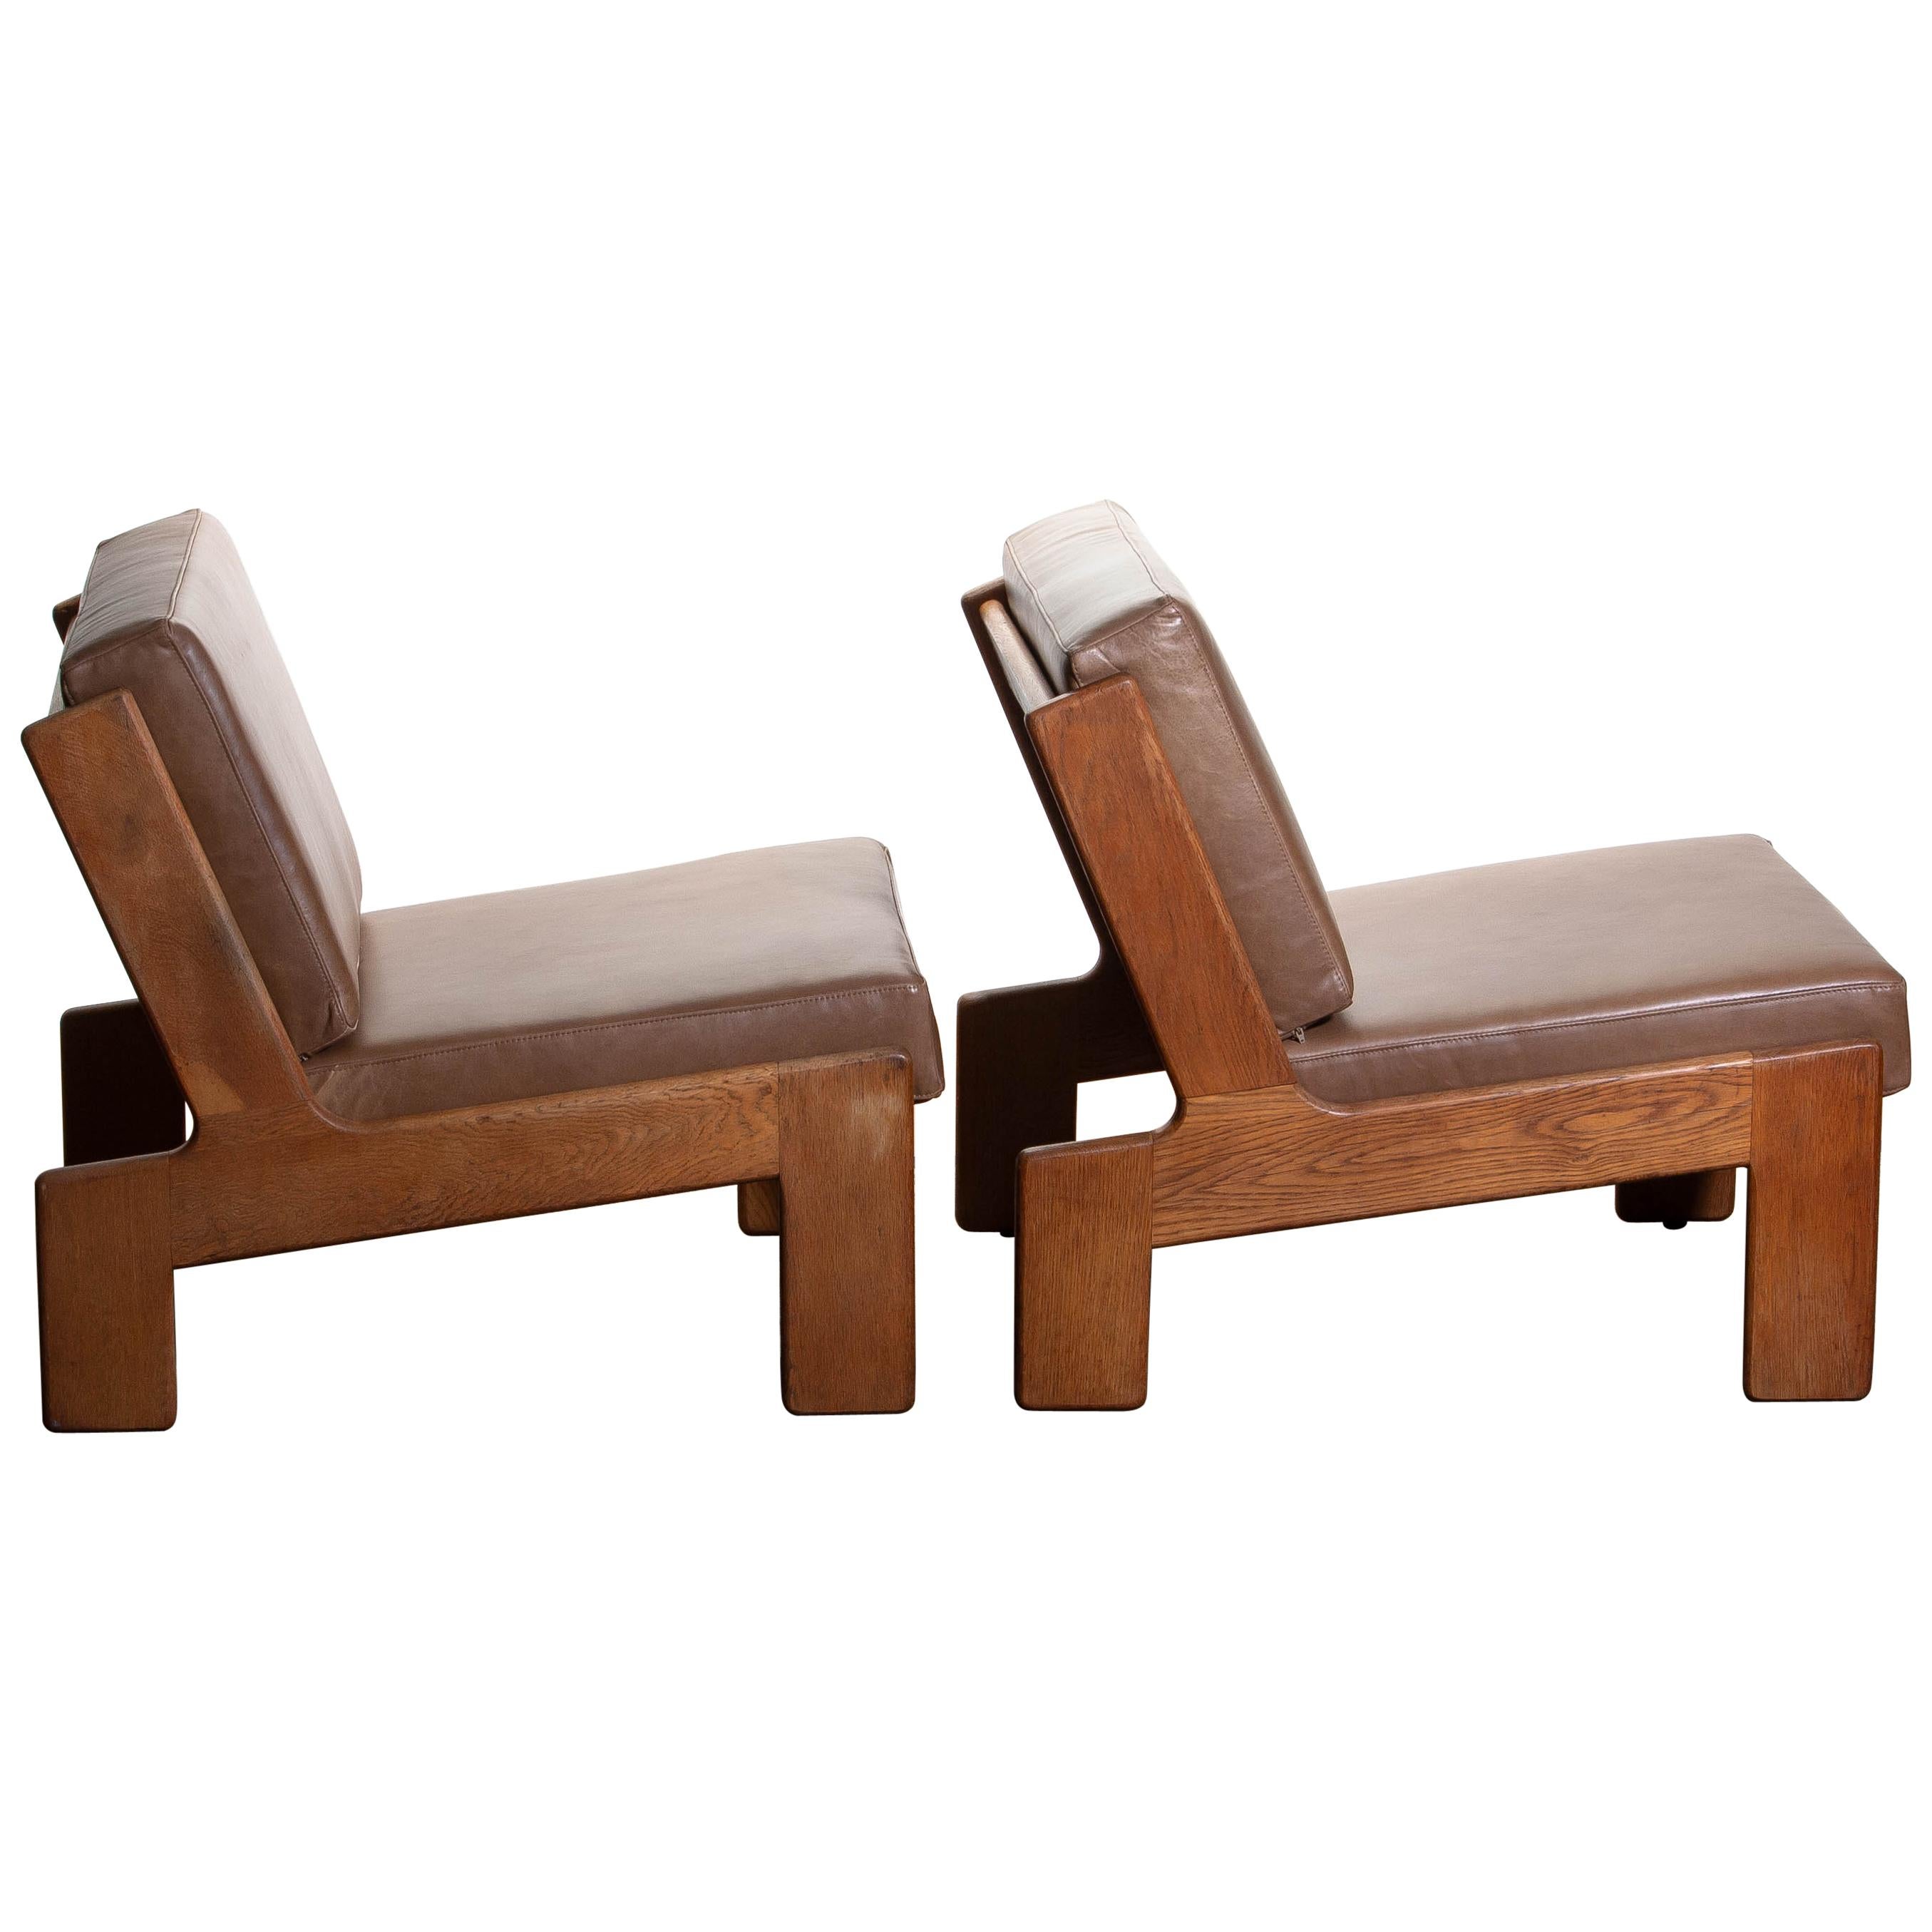 1960, Pair of Oak and Leather Cubist Lounge Chairs by Esko Pajamies for Asko